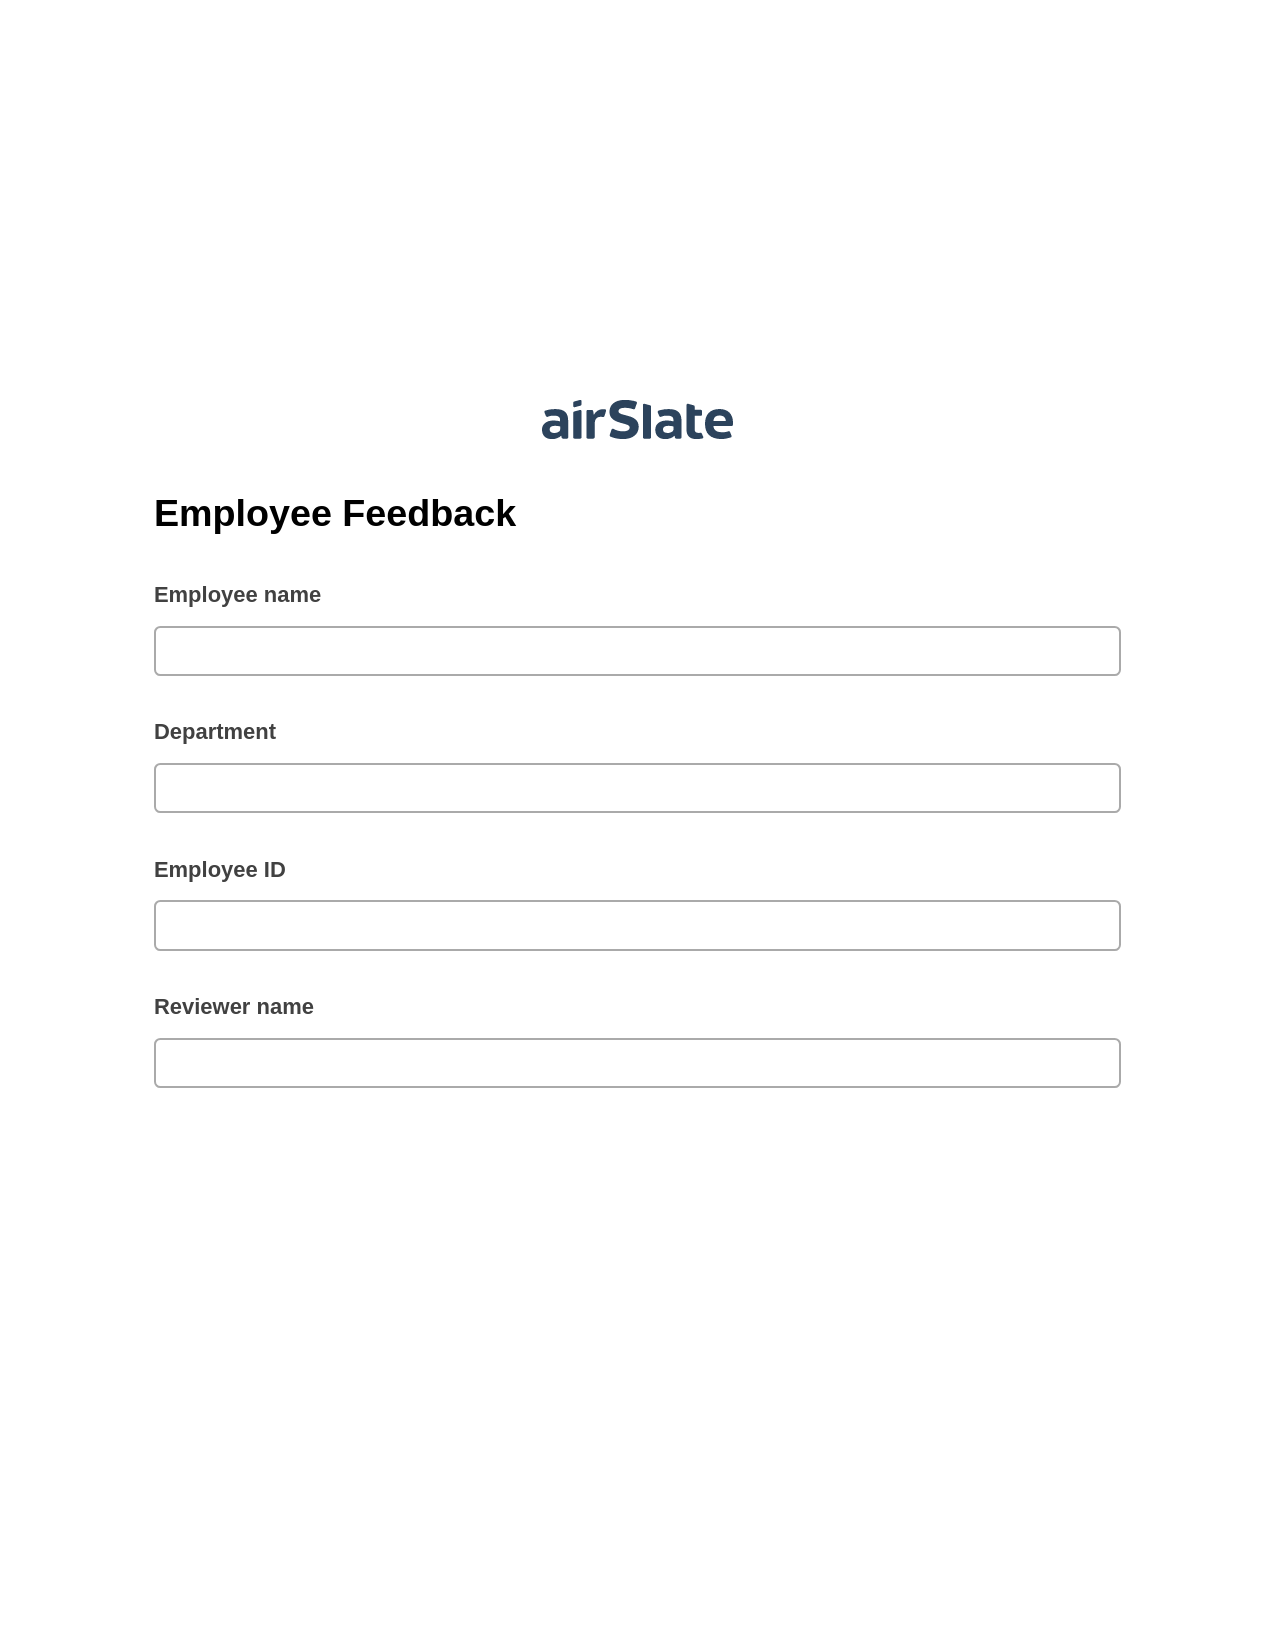 Multirole Employee Feedback Pre-fill from Google Sheet Dropdown Options Bot, In-person Signing Bot, Export to Formstack Documents Bot